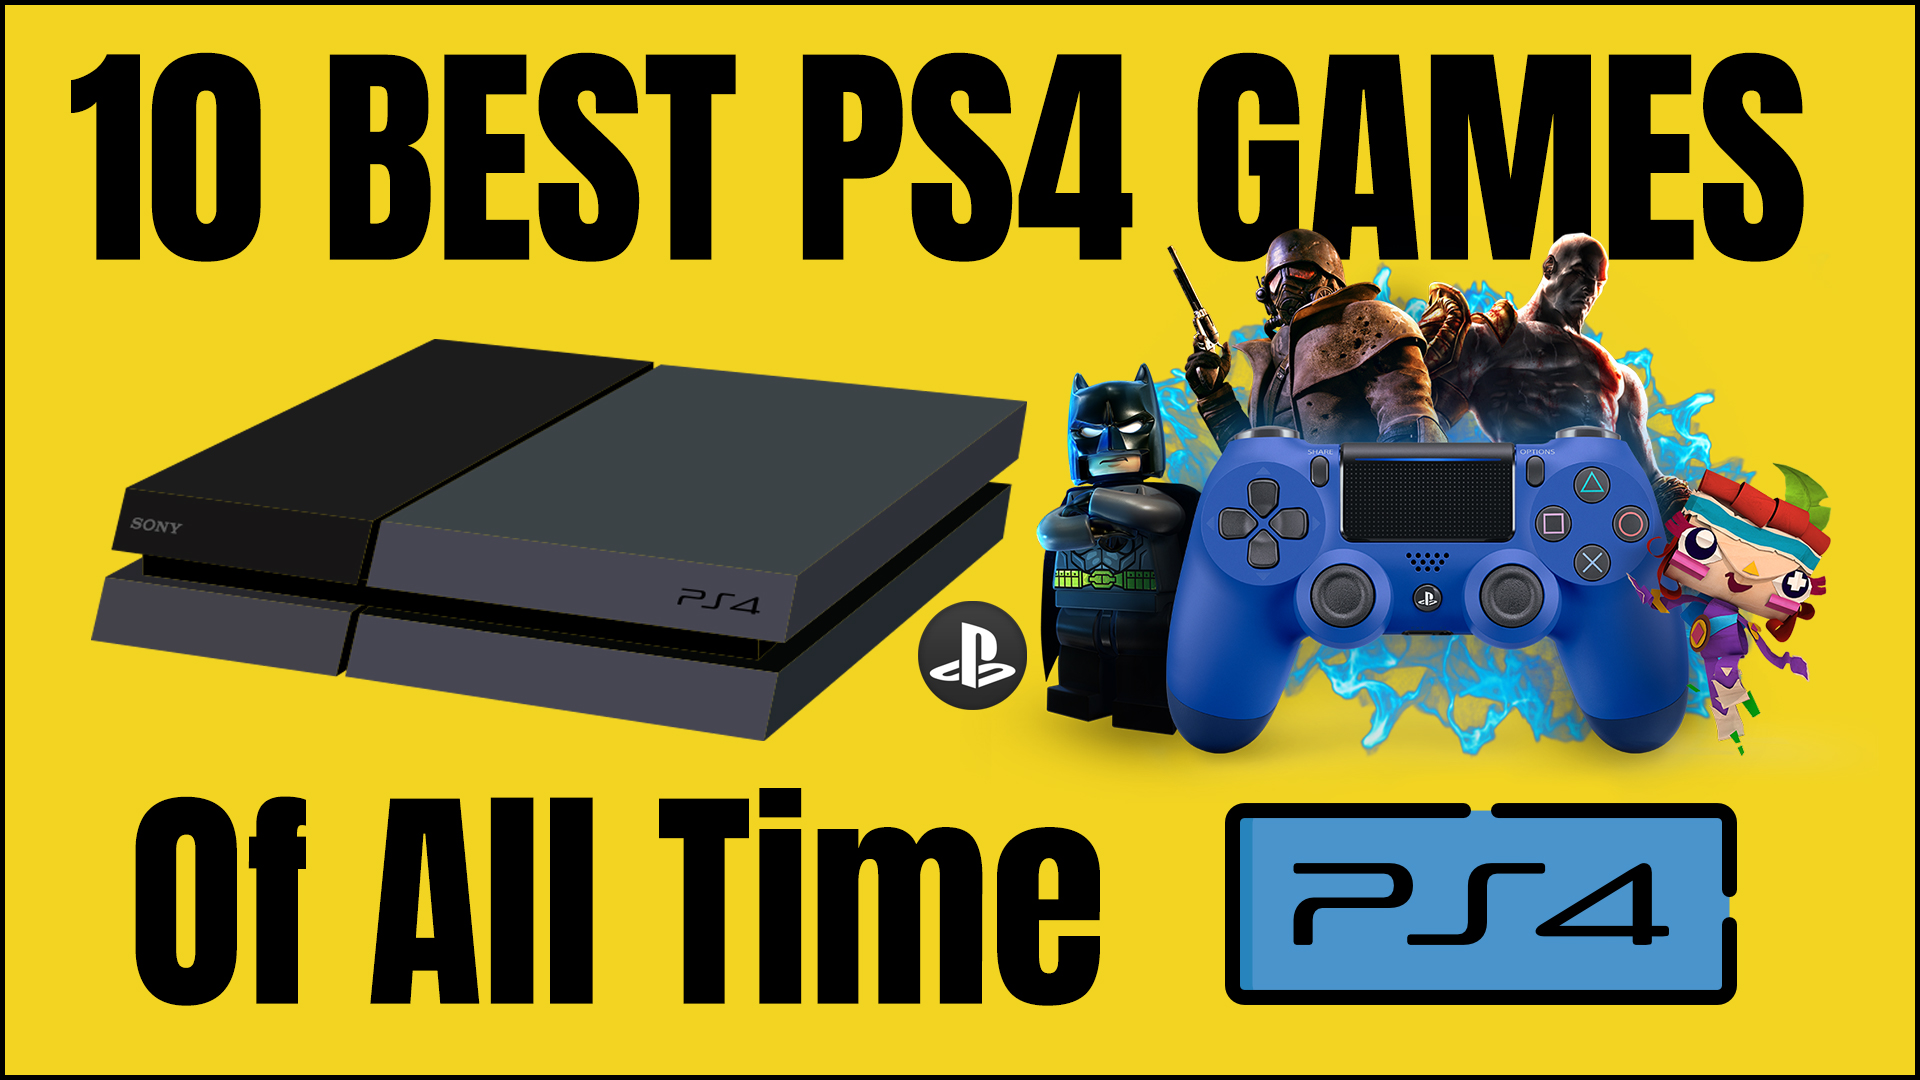 10 Best PS4 Games of All Time